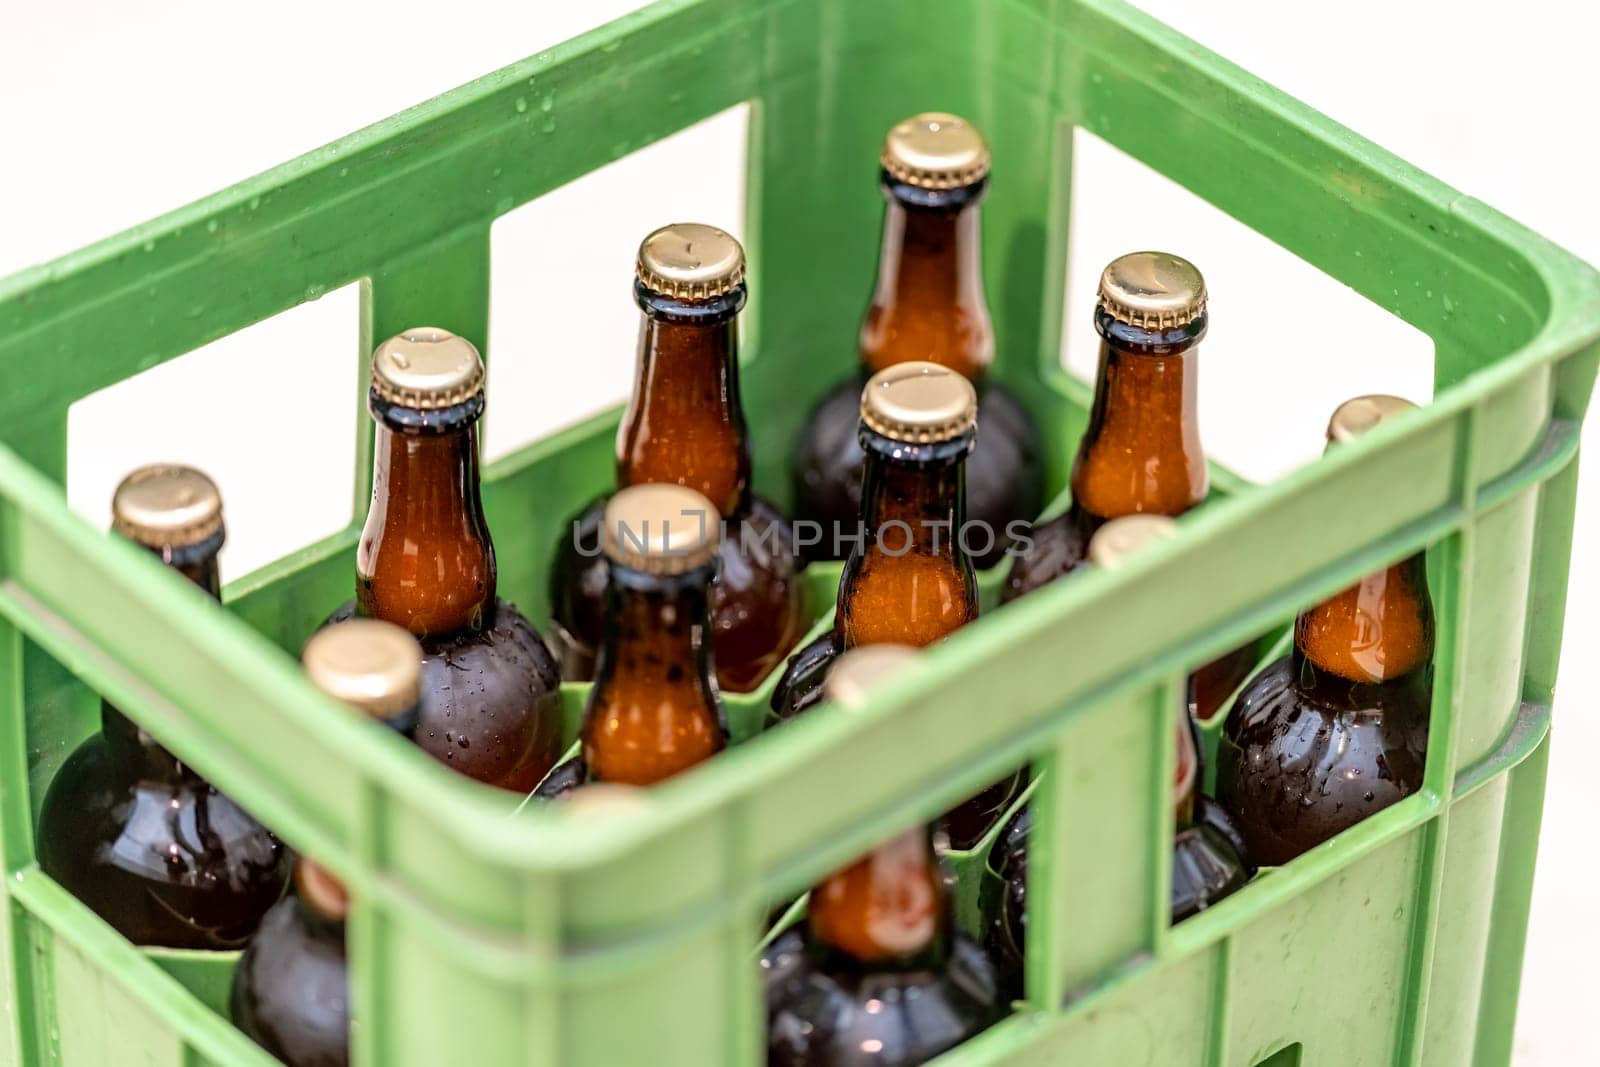 drink bottles in crates in storage. High quality photo